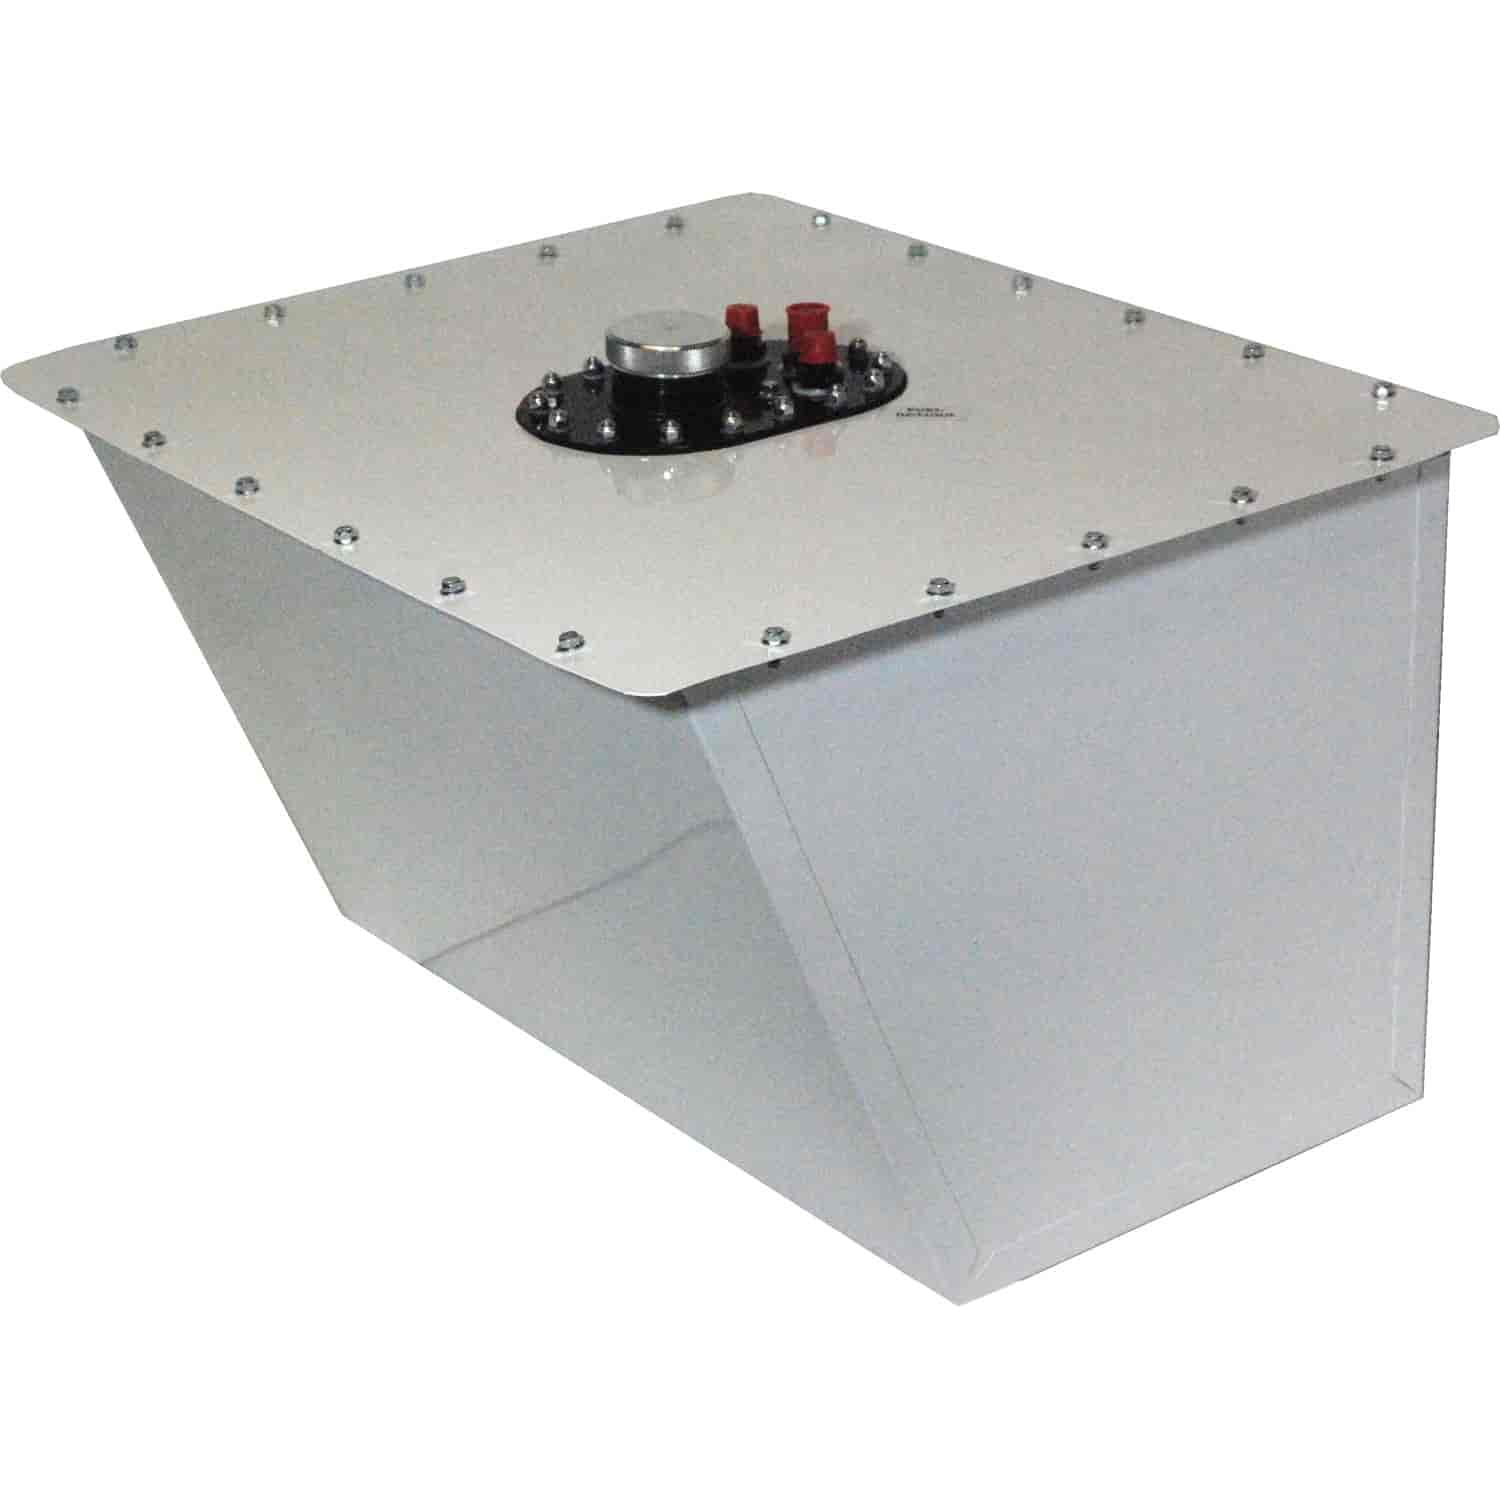 Wedge Steel Fuel Cell Dimensions: Length Top: 23